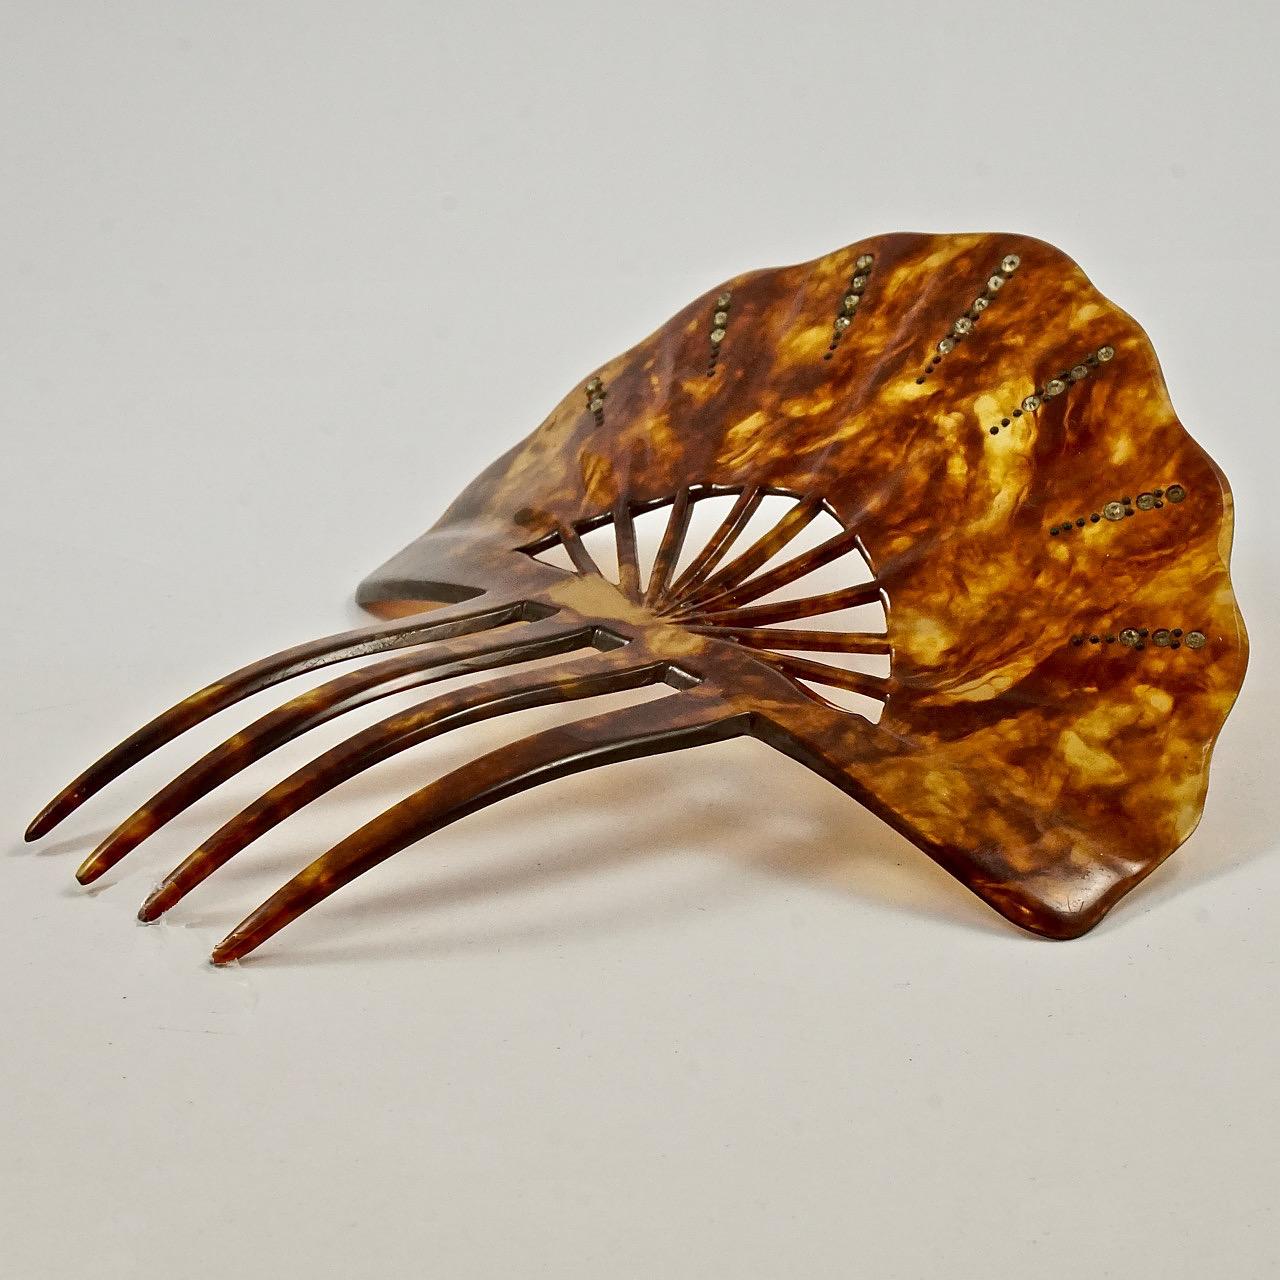 
Lovely Art Deco faux tortoiseshell four prong fan shaped hair comb with a scalloped edge, featuring clear faceted rhinestones and metal dot decoration. Measuring length 13.3cm / 5.2 inches by width 12.2cm / 4.8 inches. The hair comb is in very good